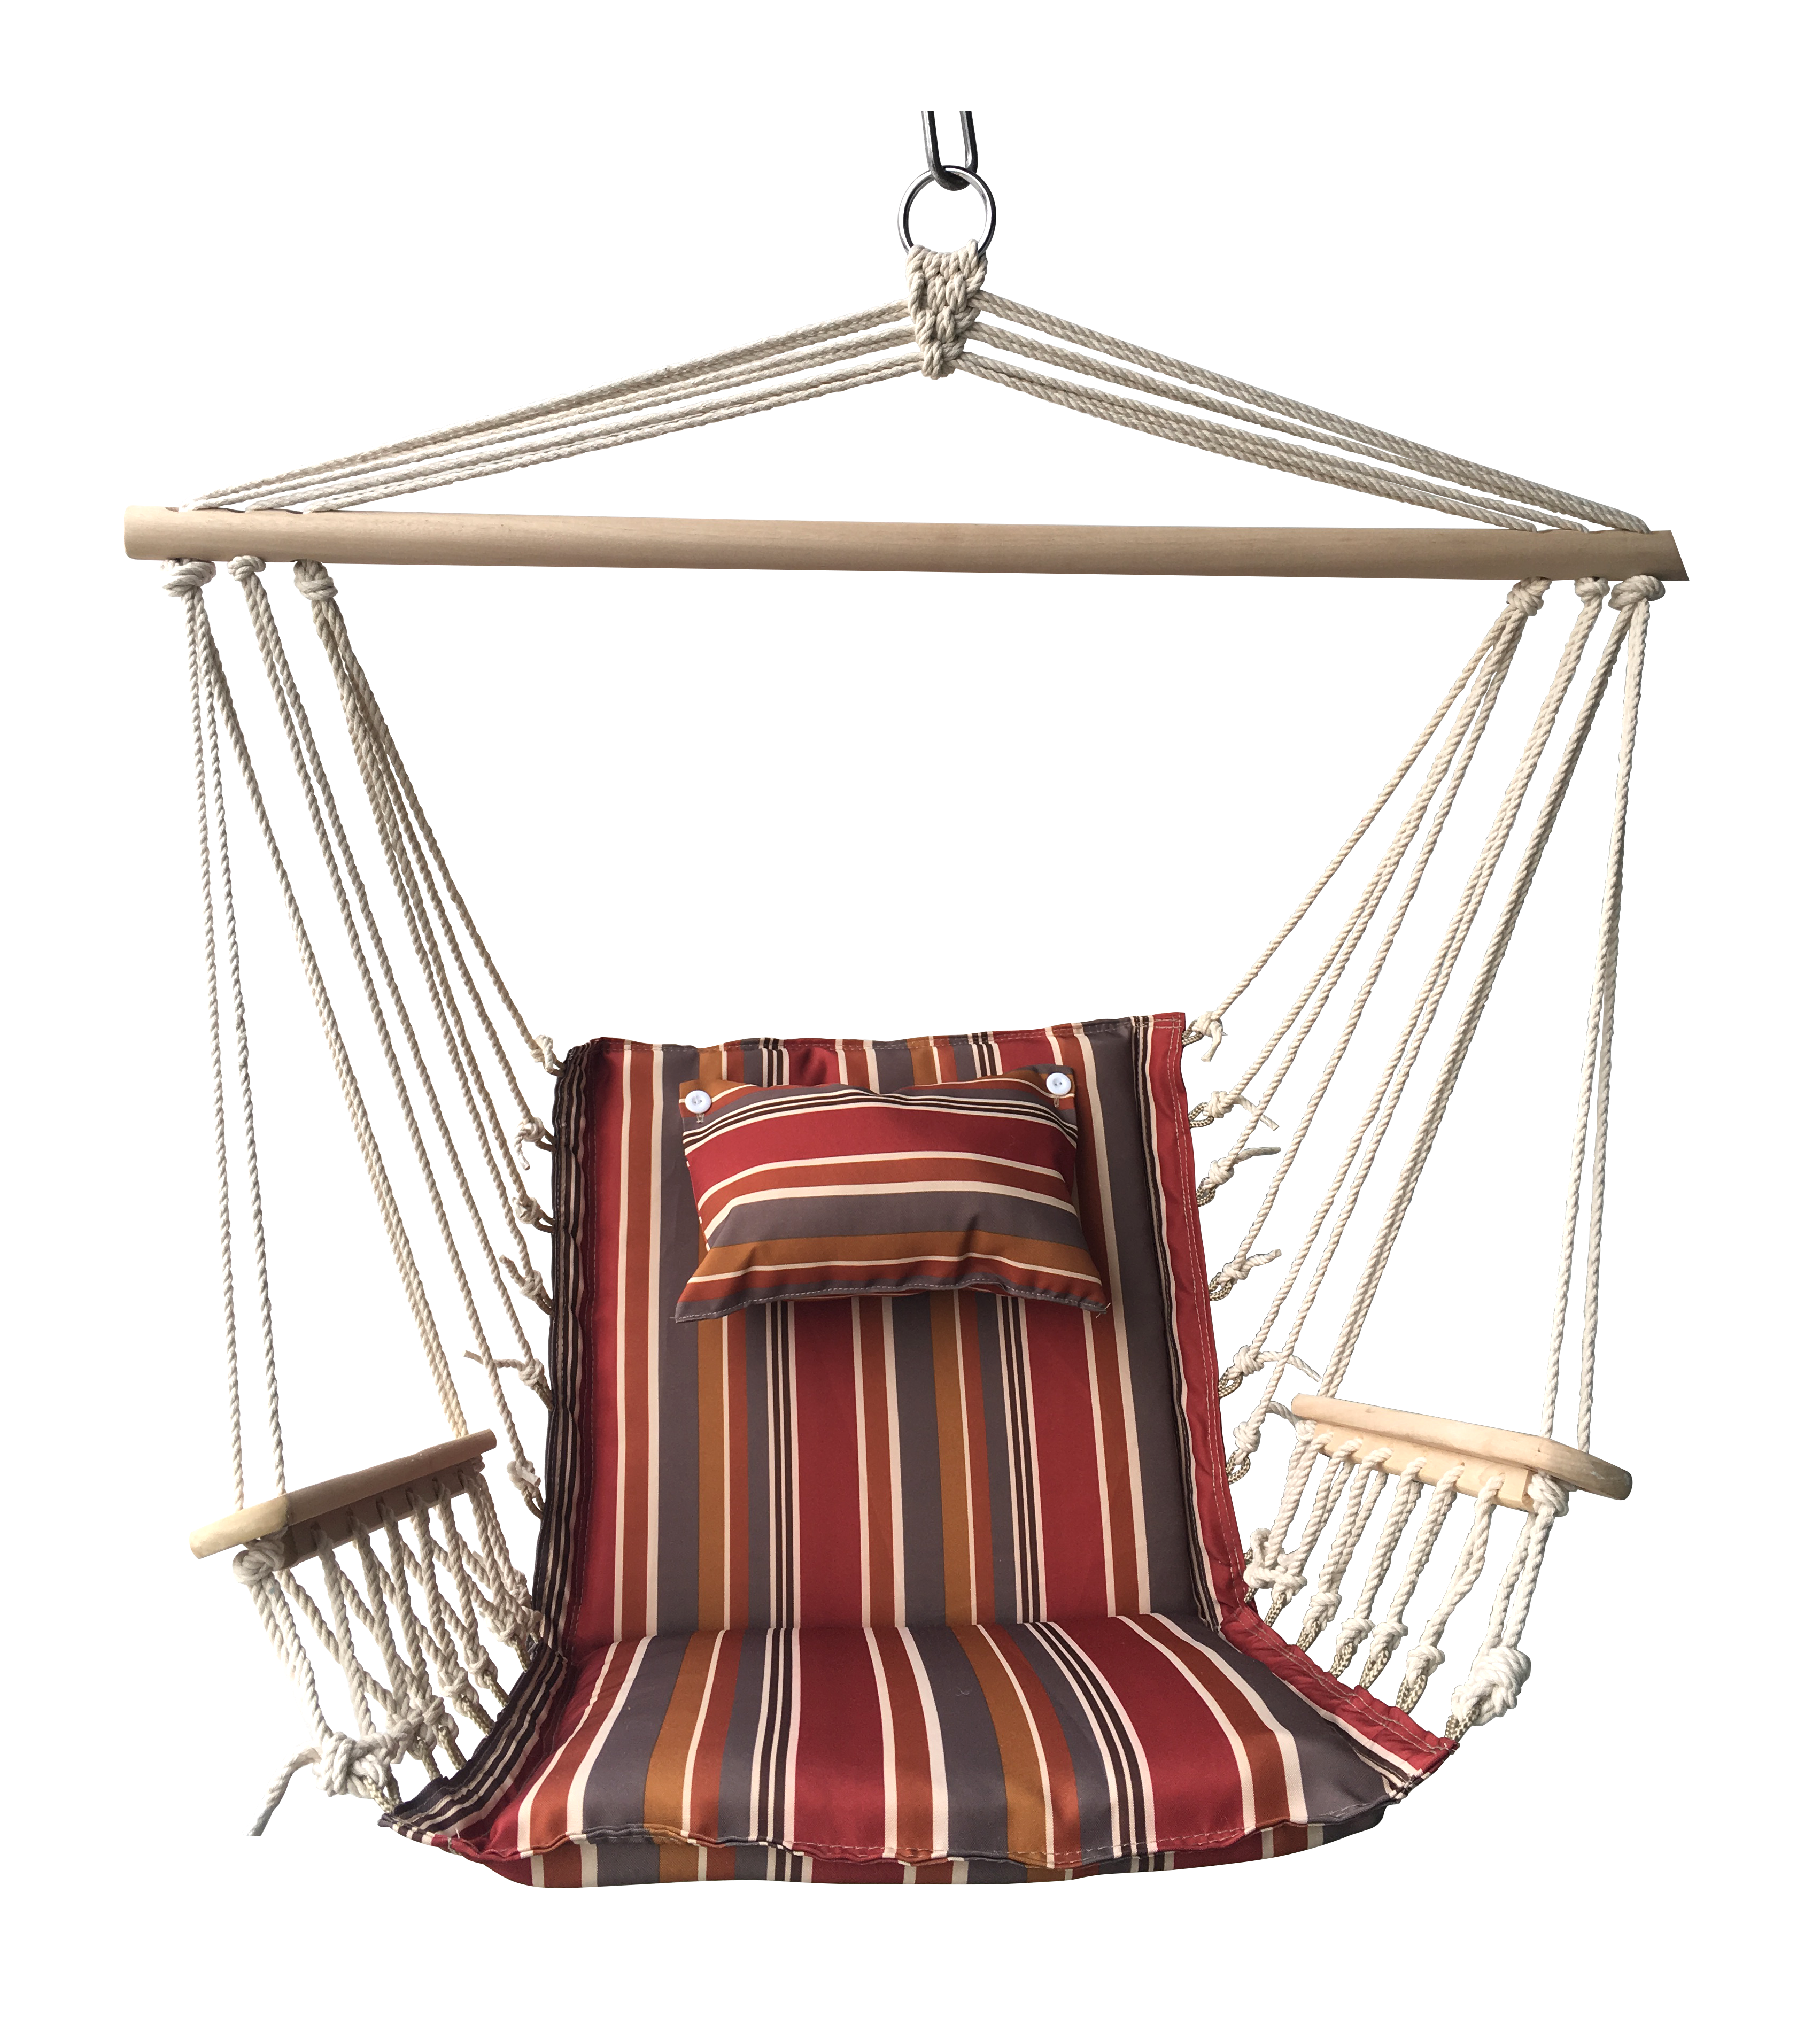 Backyard Expressions Deluxe Hammock Chair